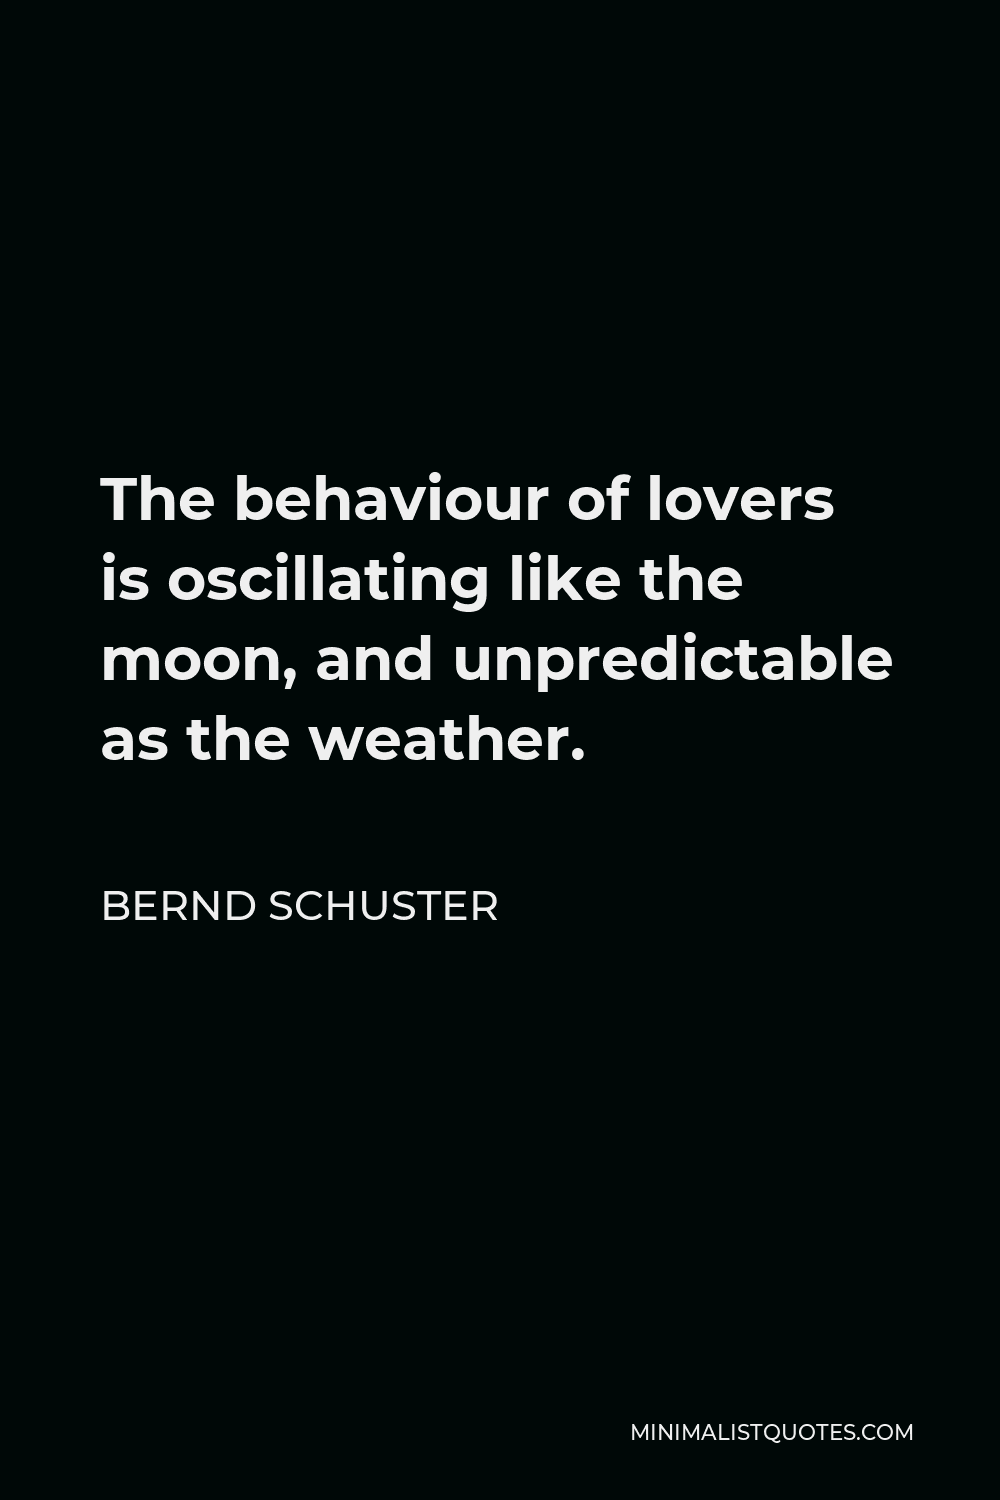 Bernd Schuster Quote - The behaviour of lovers is oscillating like the moon, and unpredictable as the weather.